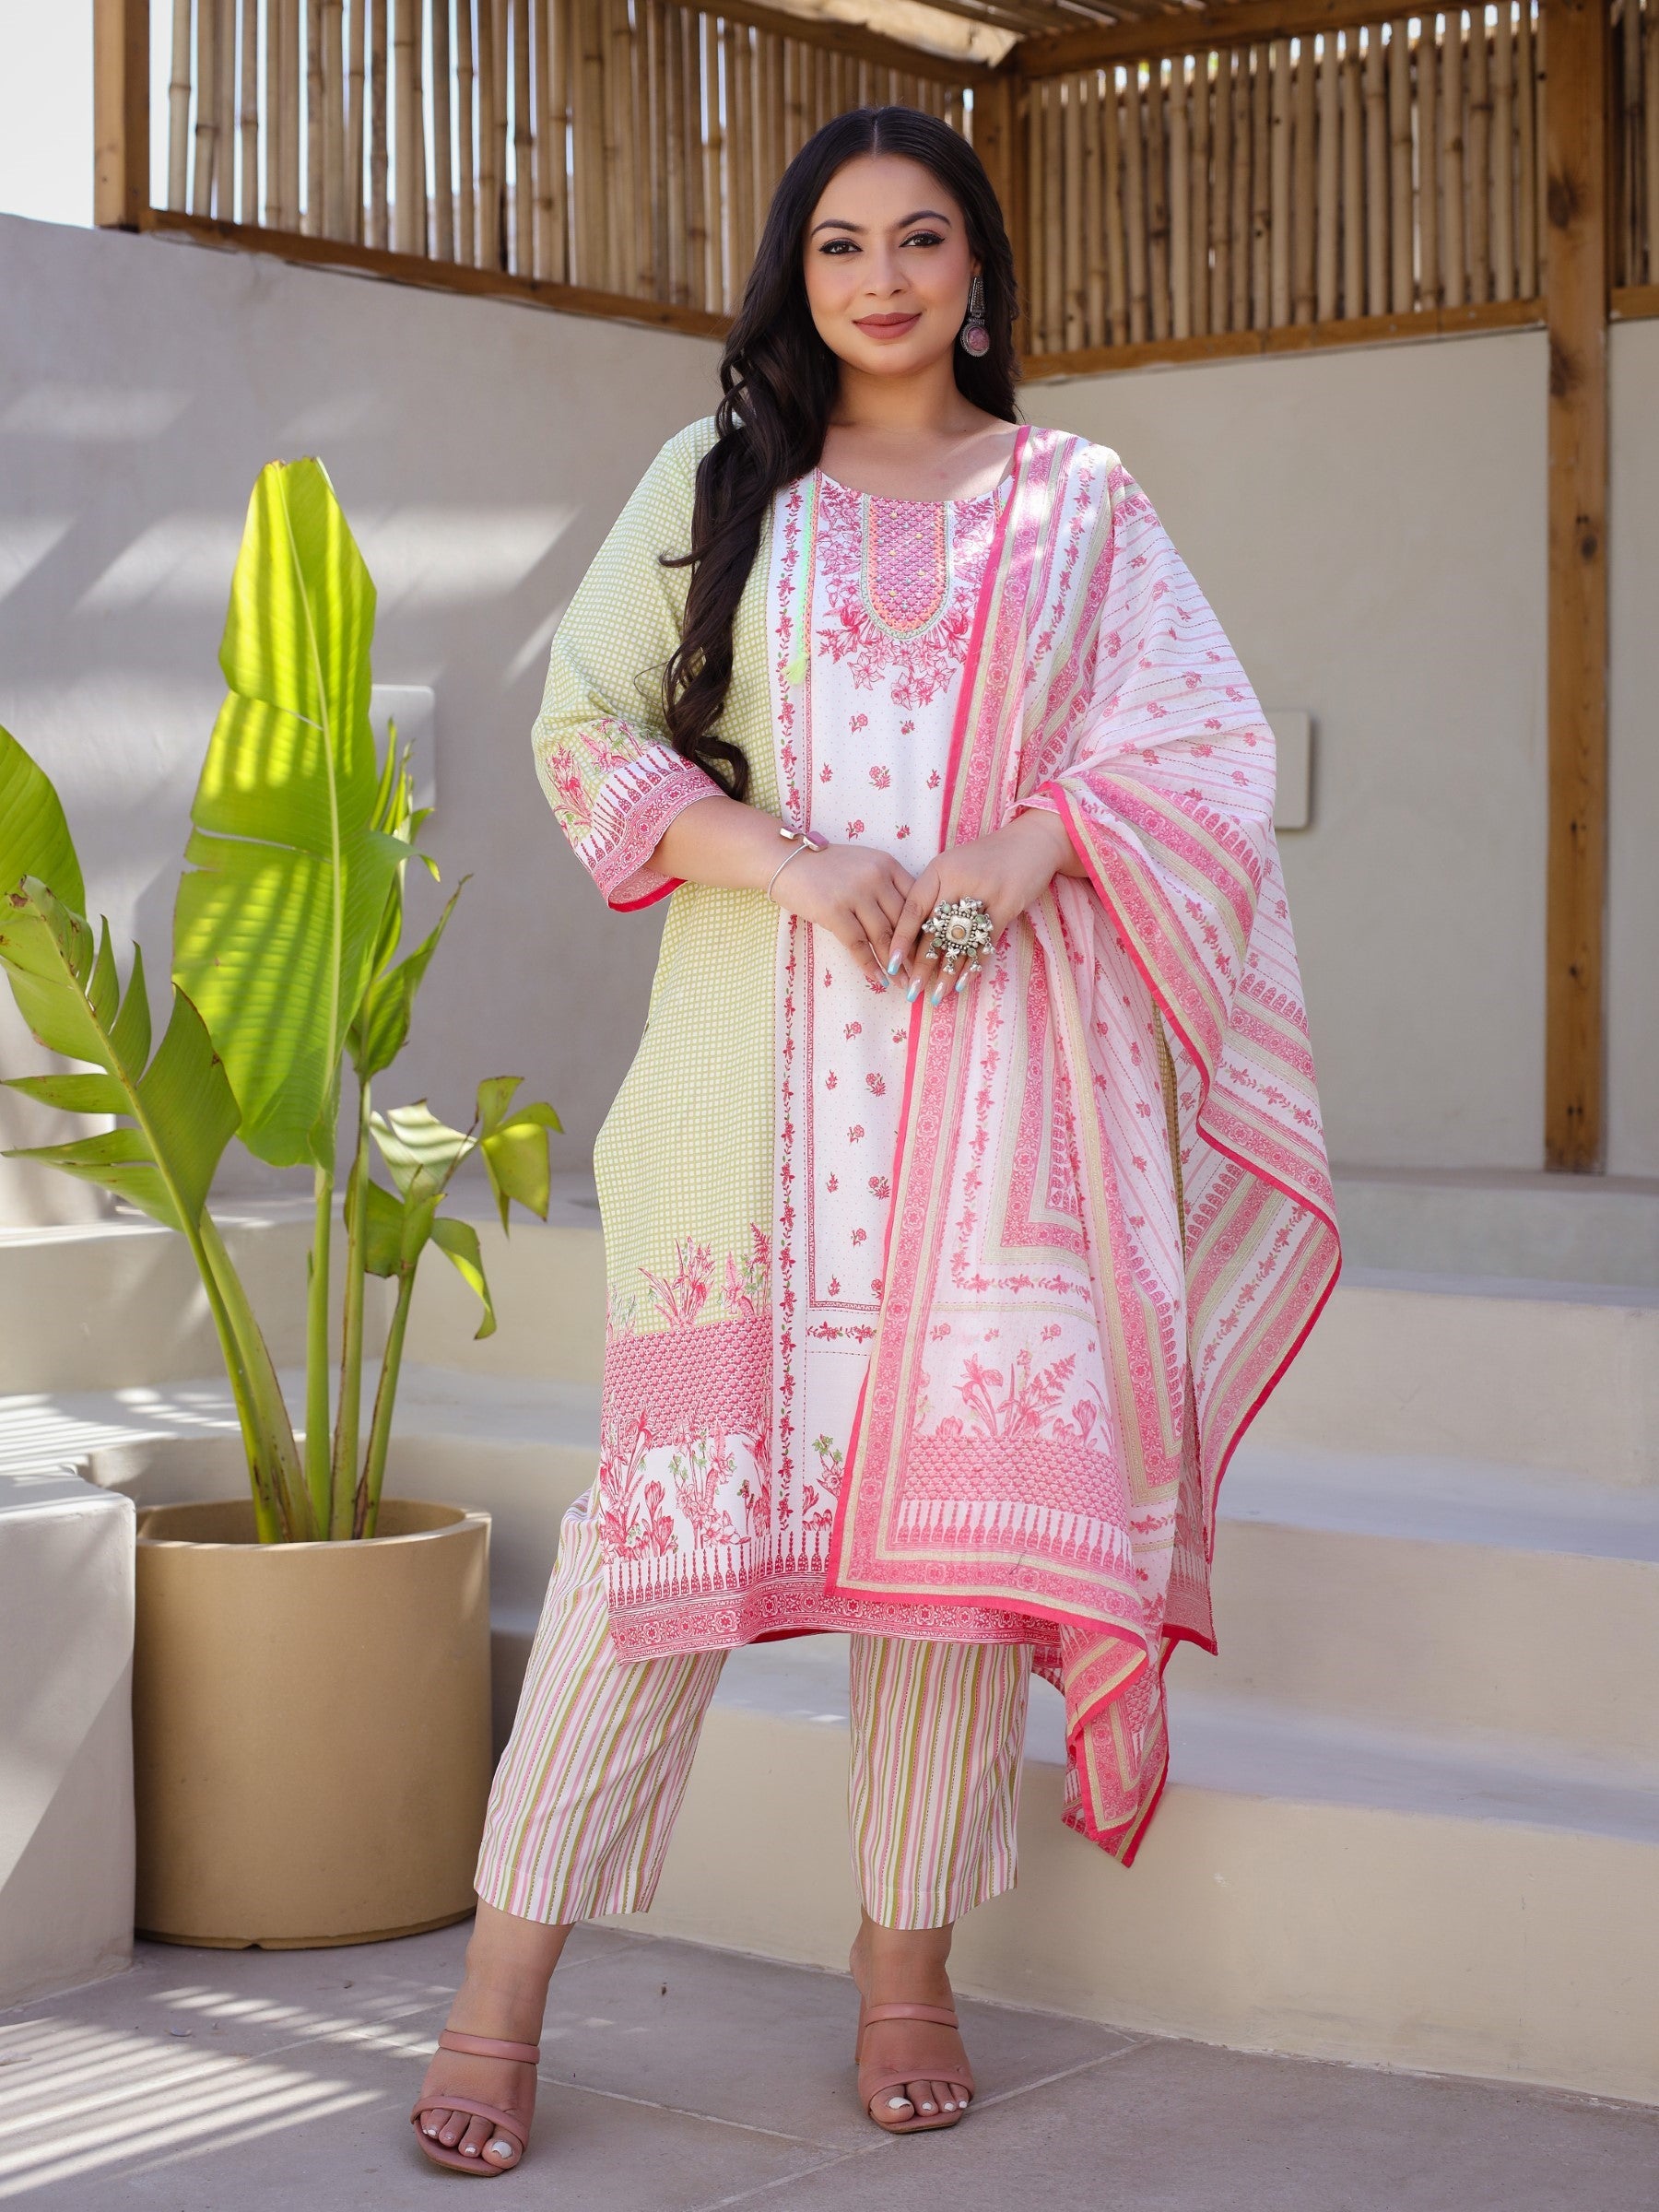 Juniper Multi-Colored Floral Printed & Stripped Rayon Plus Size Kurta Pants & Dupatta Set With Beads & Sequins (3-Pcs)